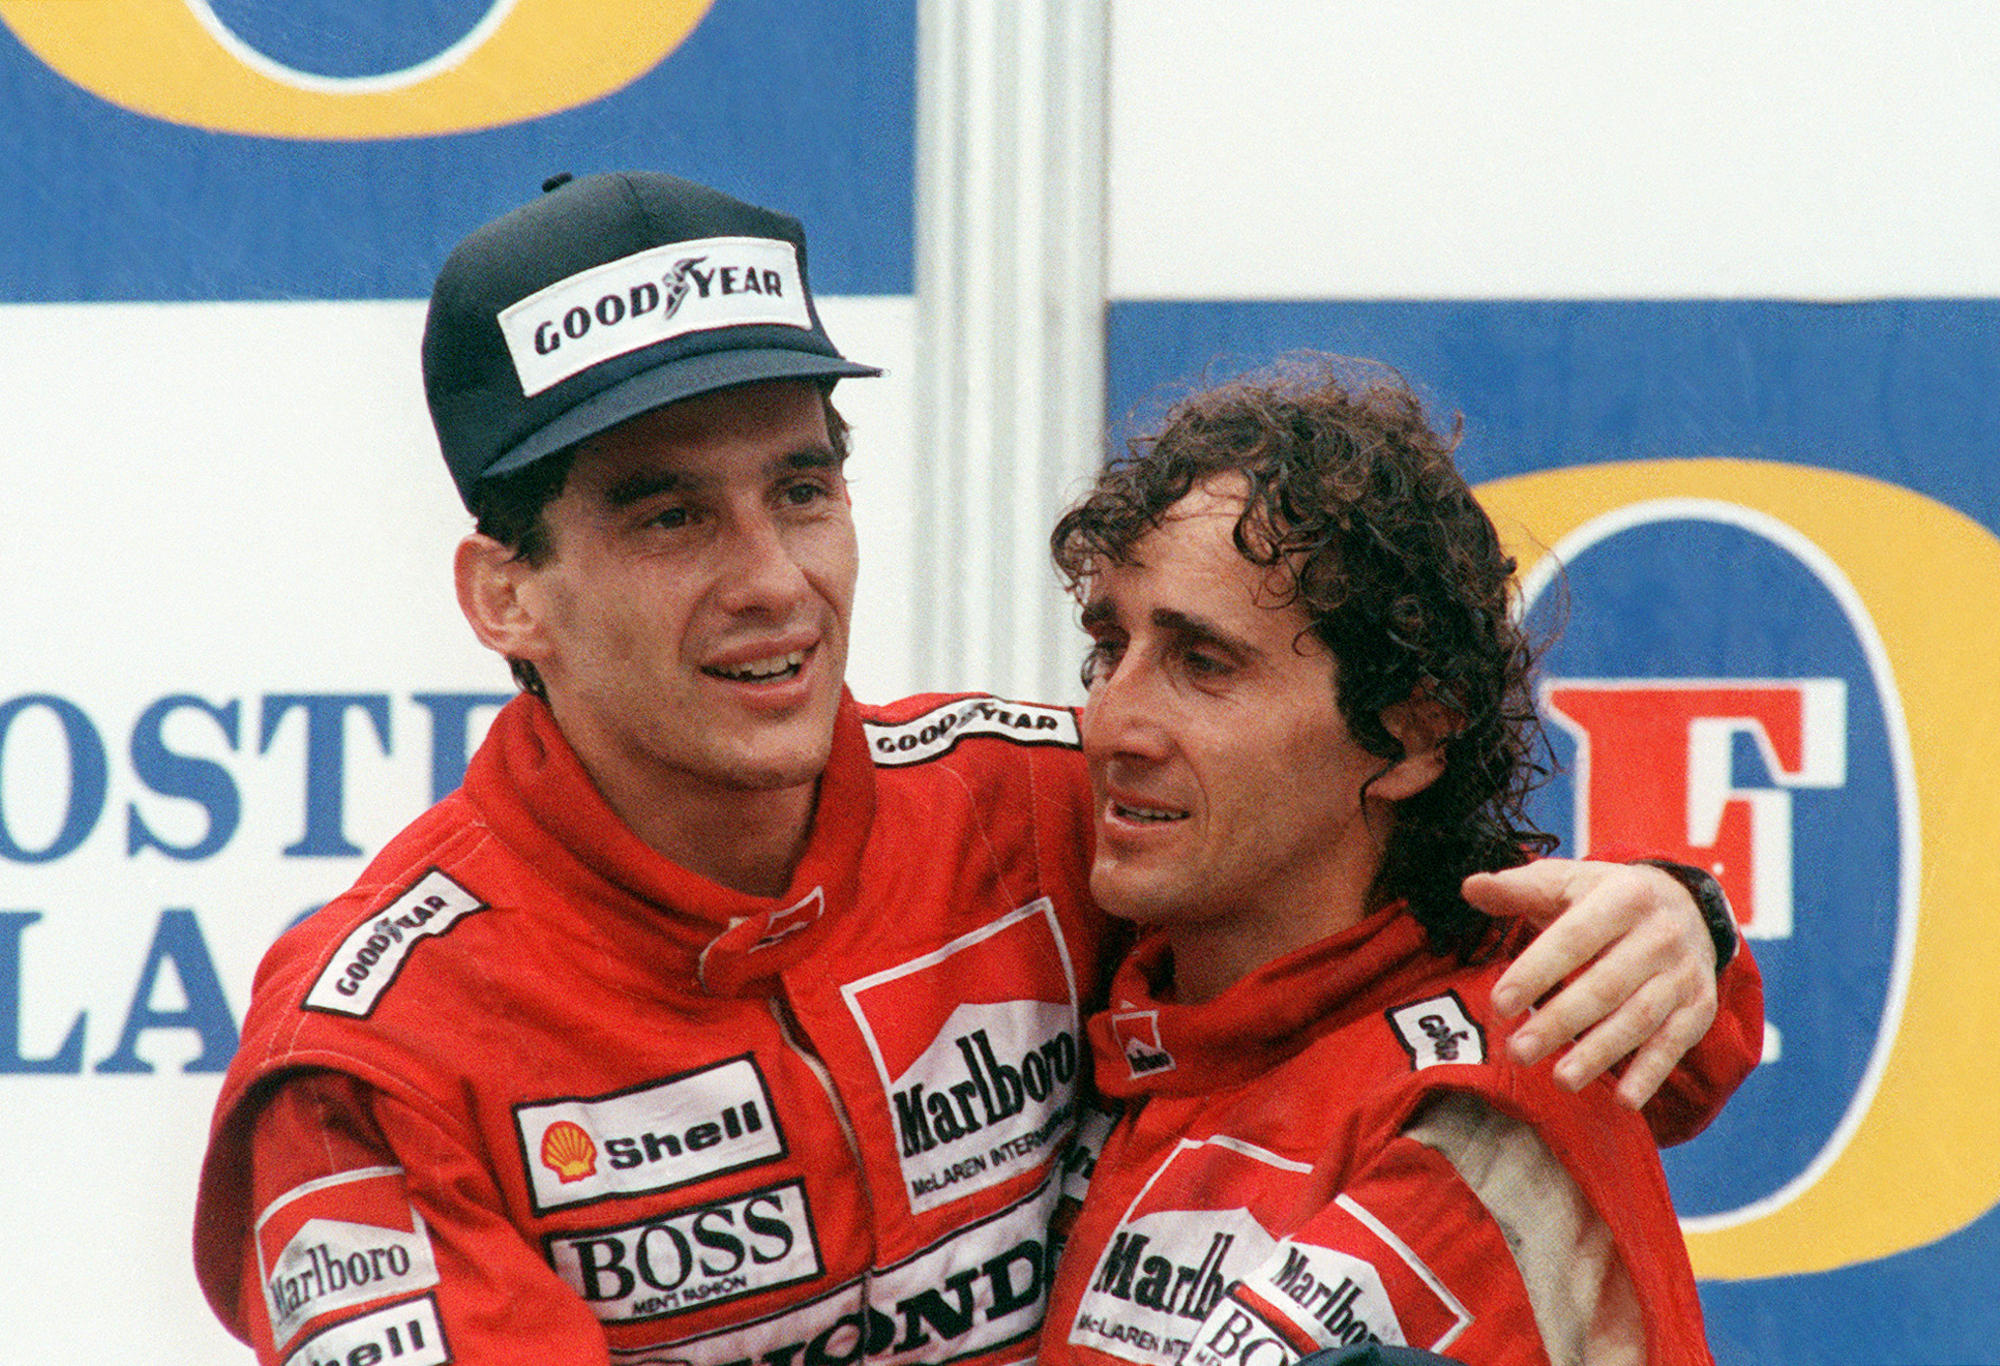 Two formula one drivers on the podium